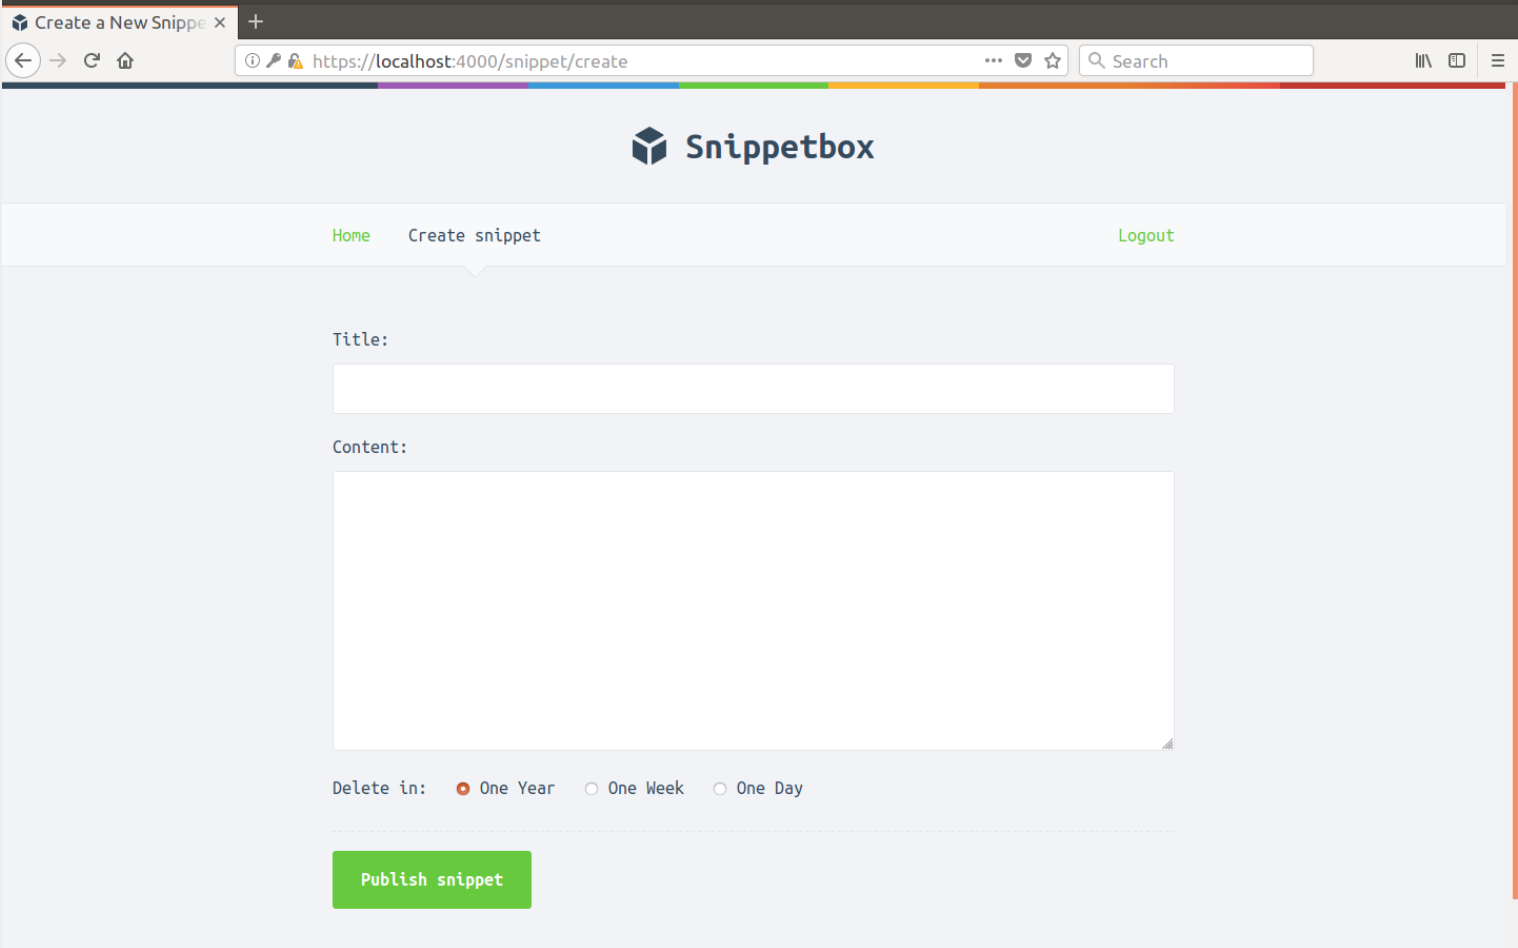 Screenshot of Snippetbox application